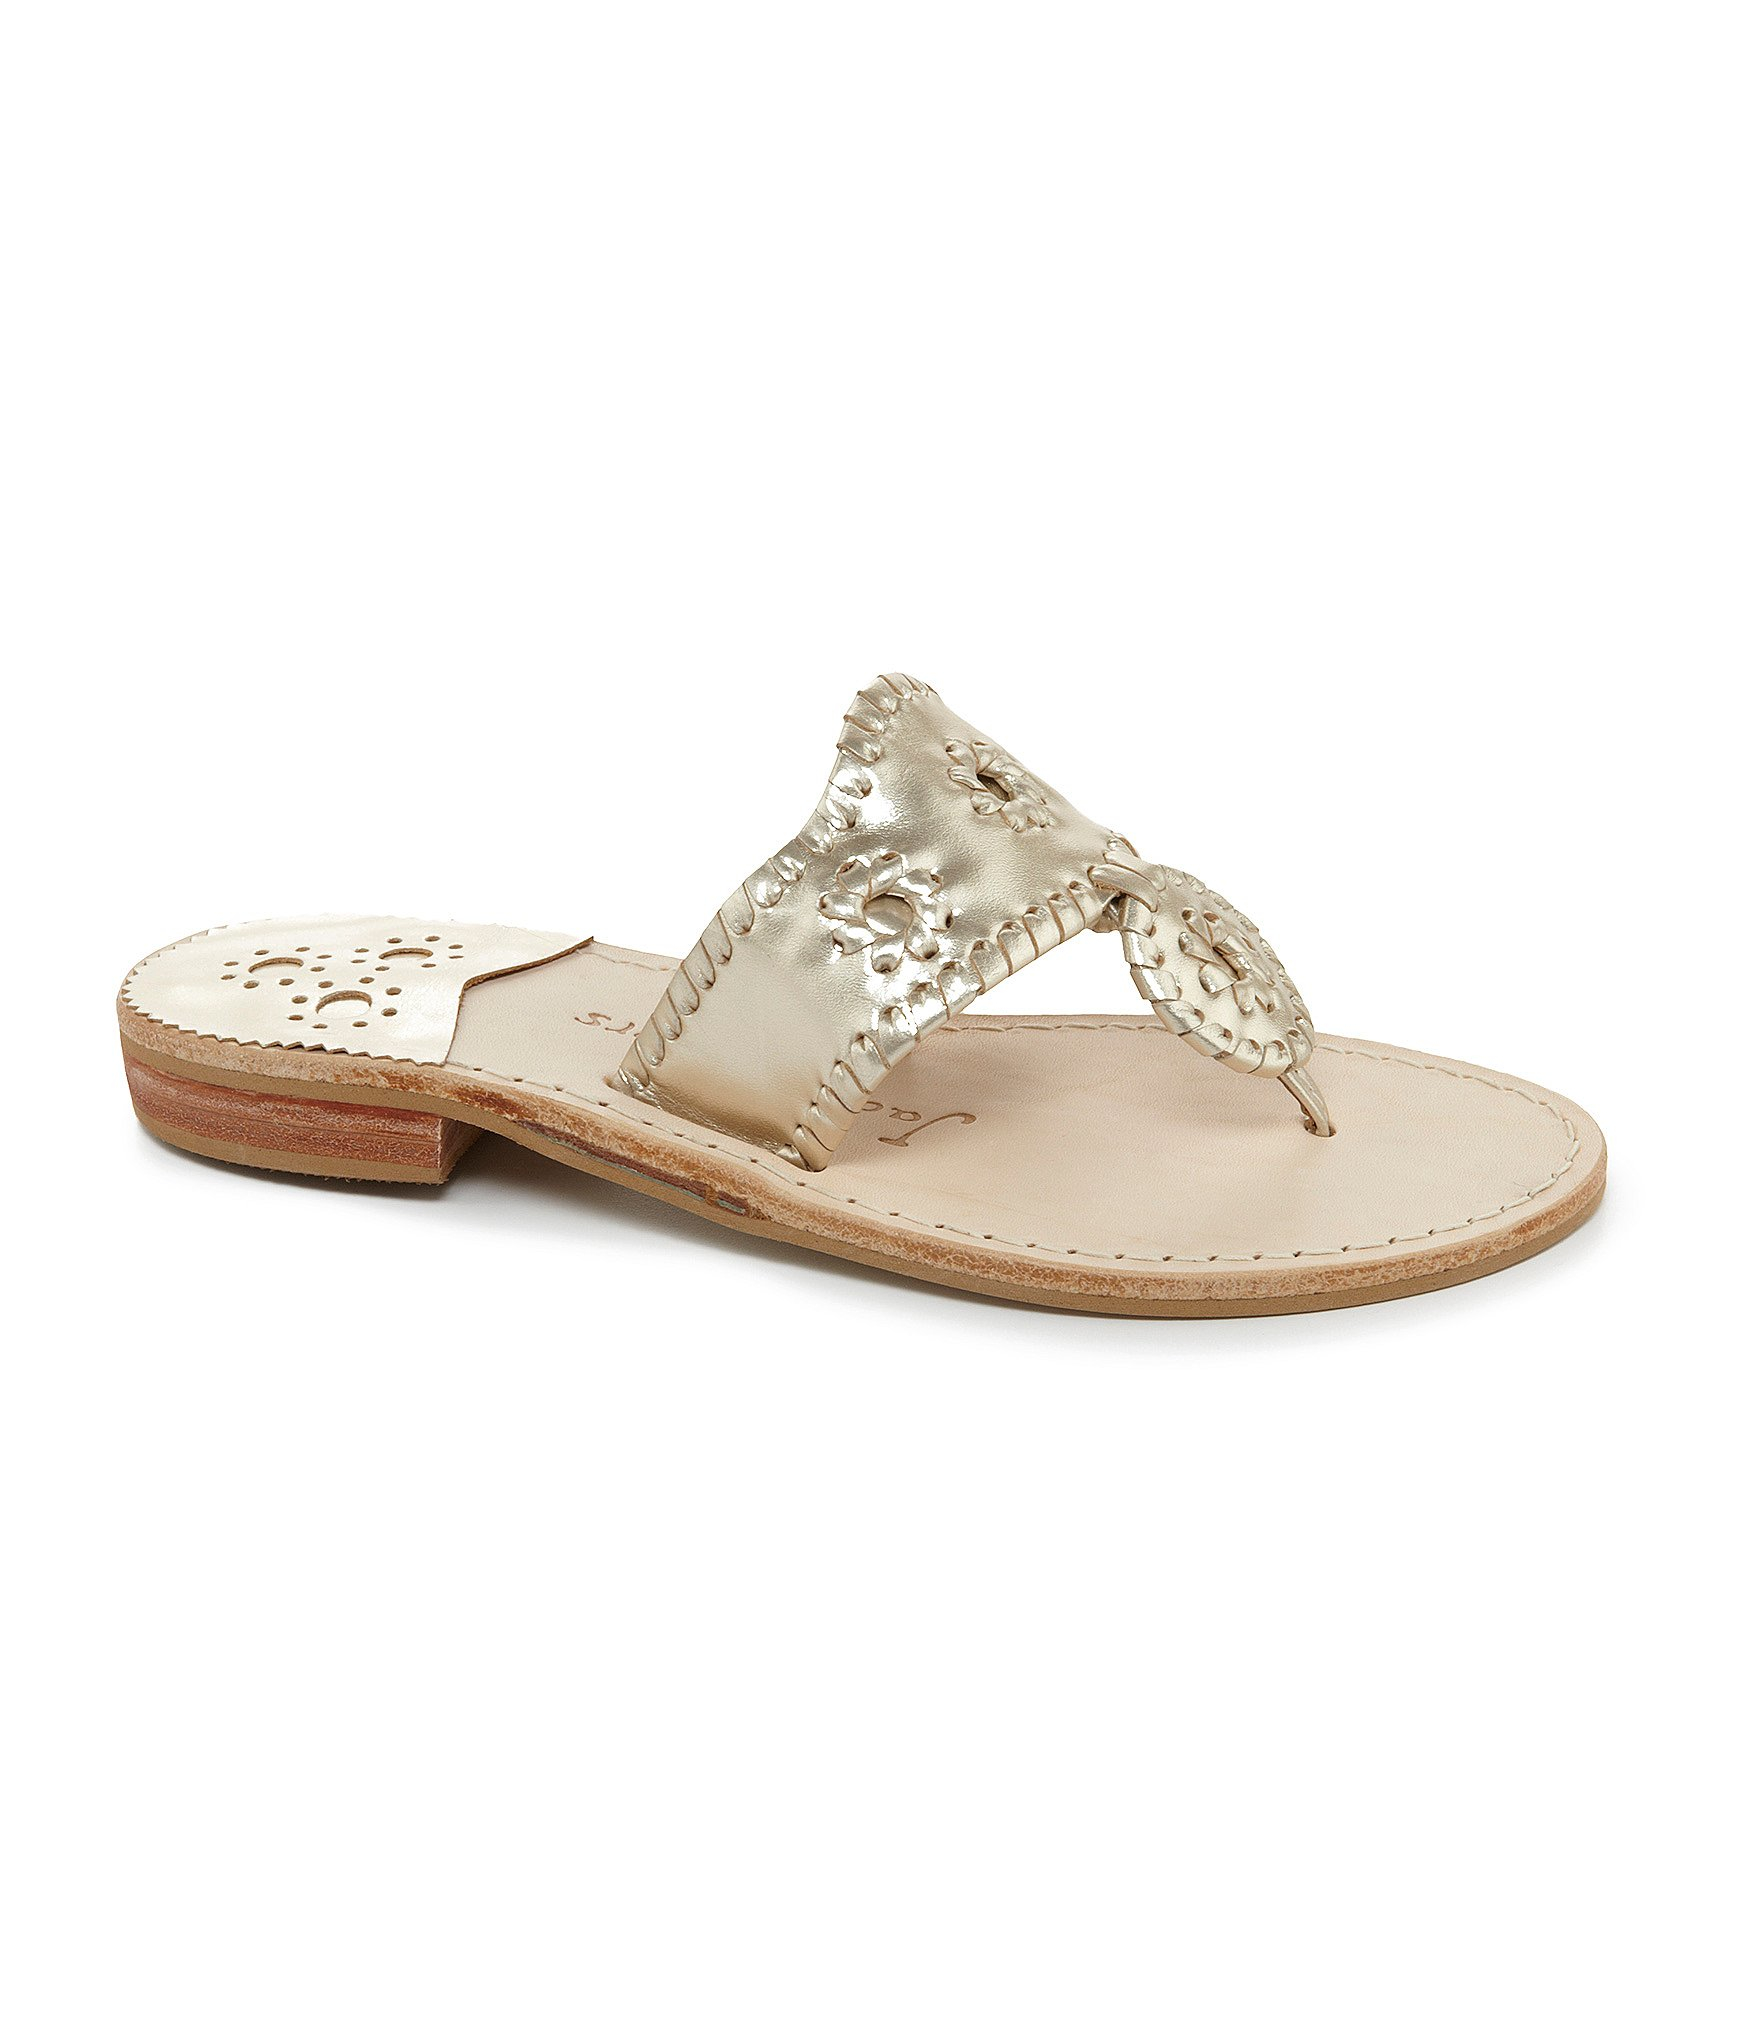 Lyst - Jack rogers Hamptons Metallic Leather Whipstitched Sandals in Gray